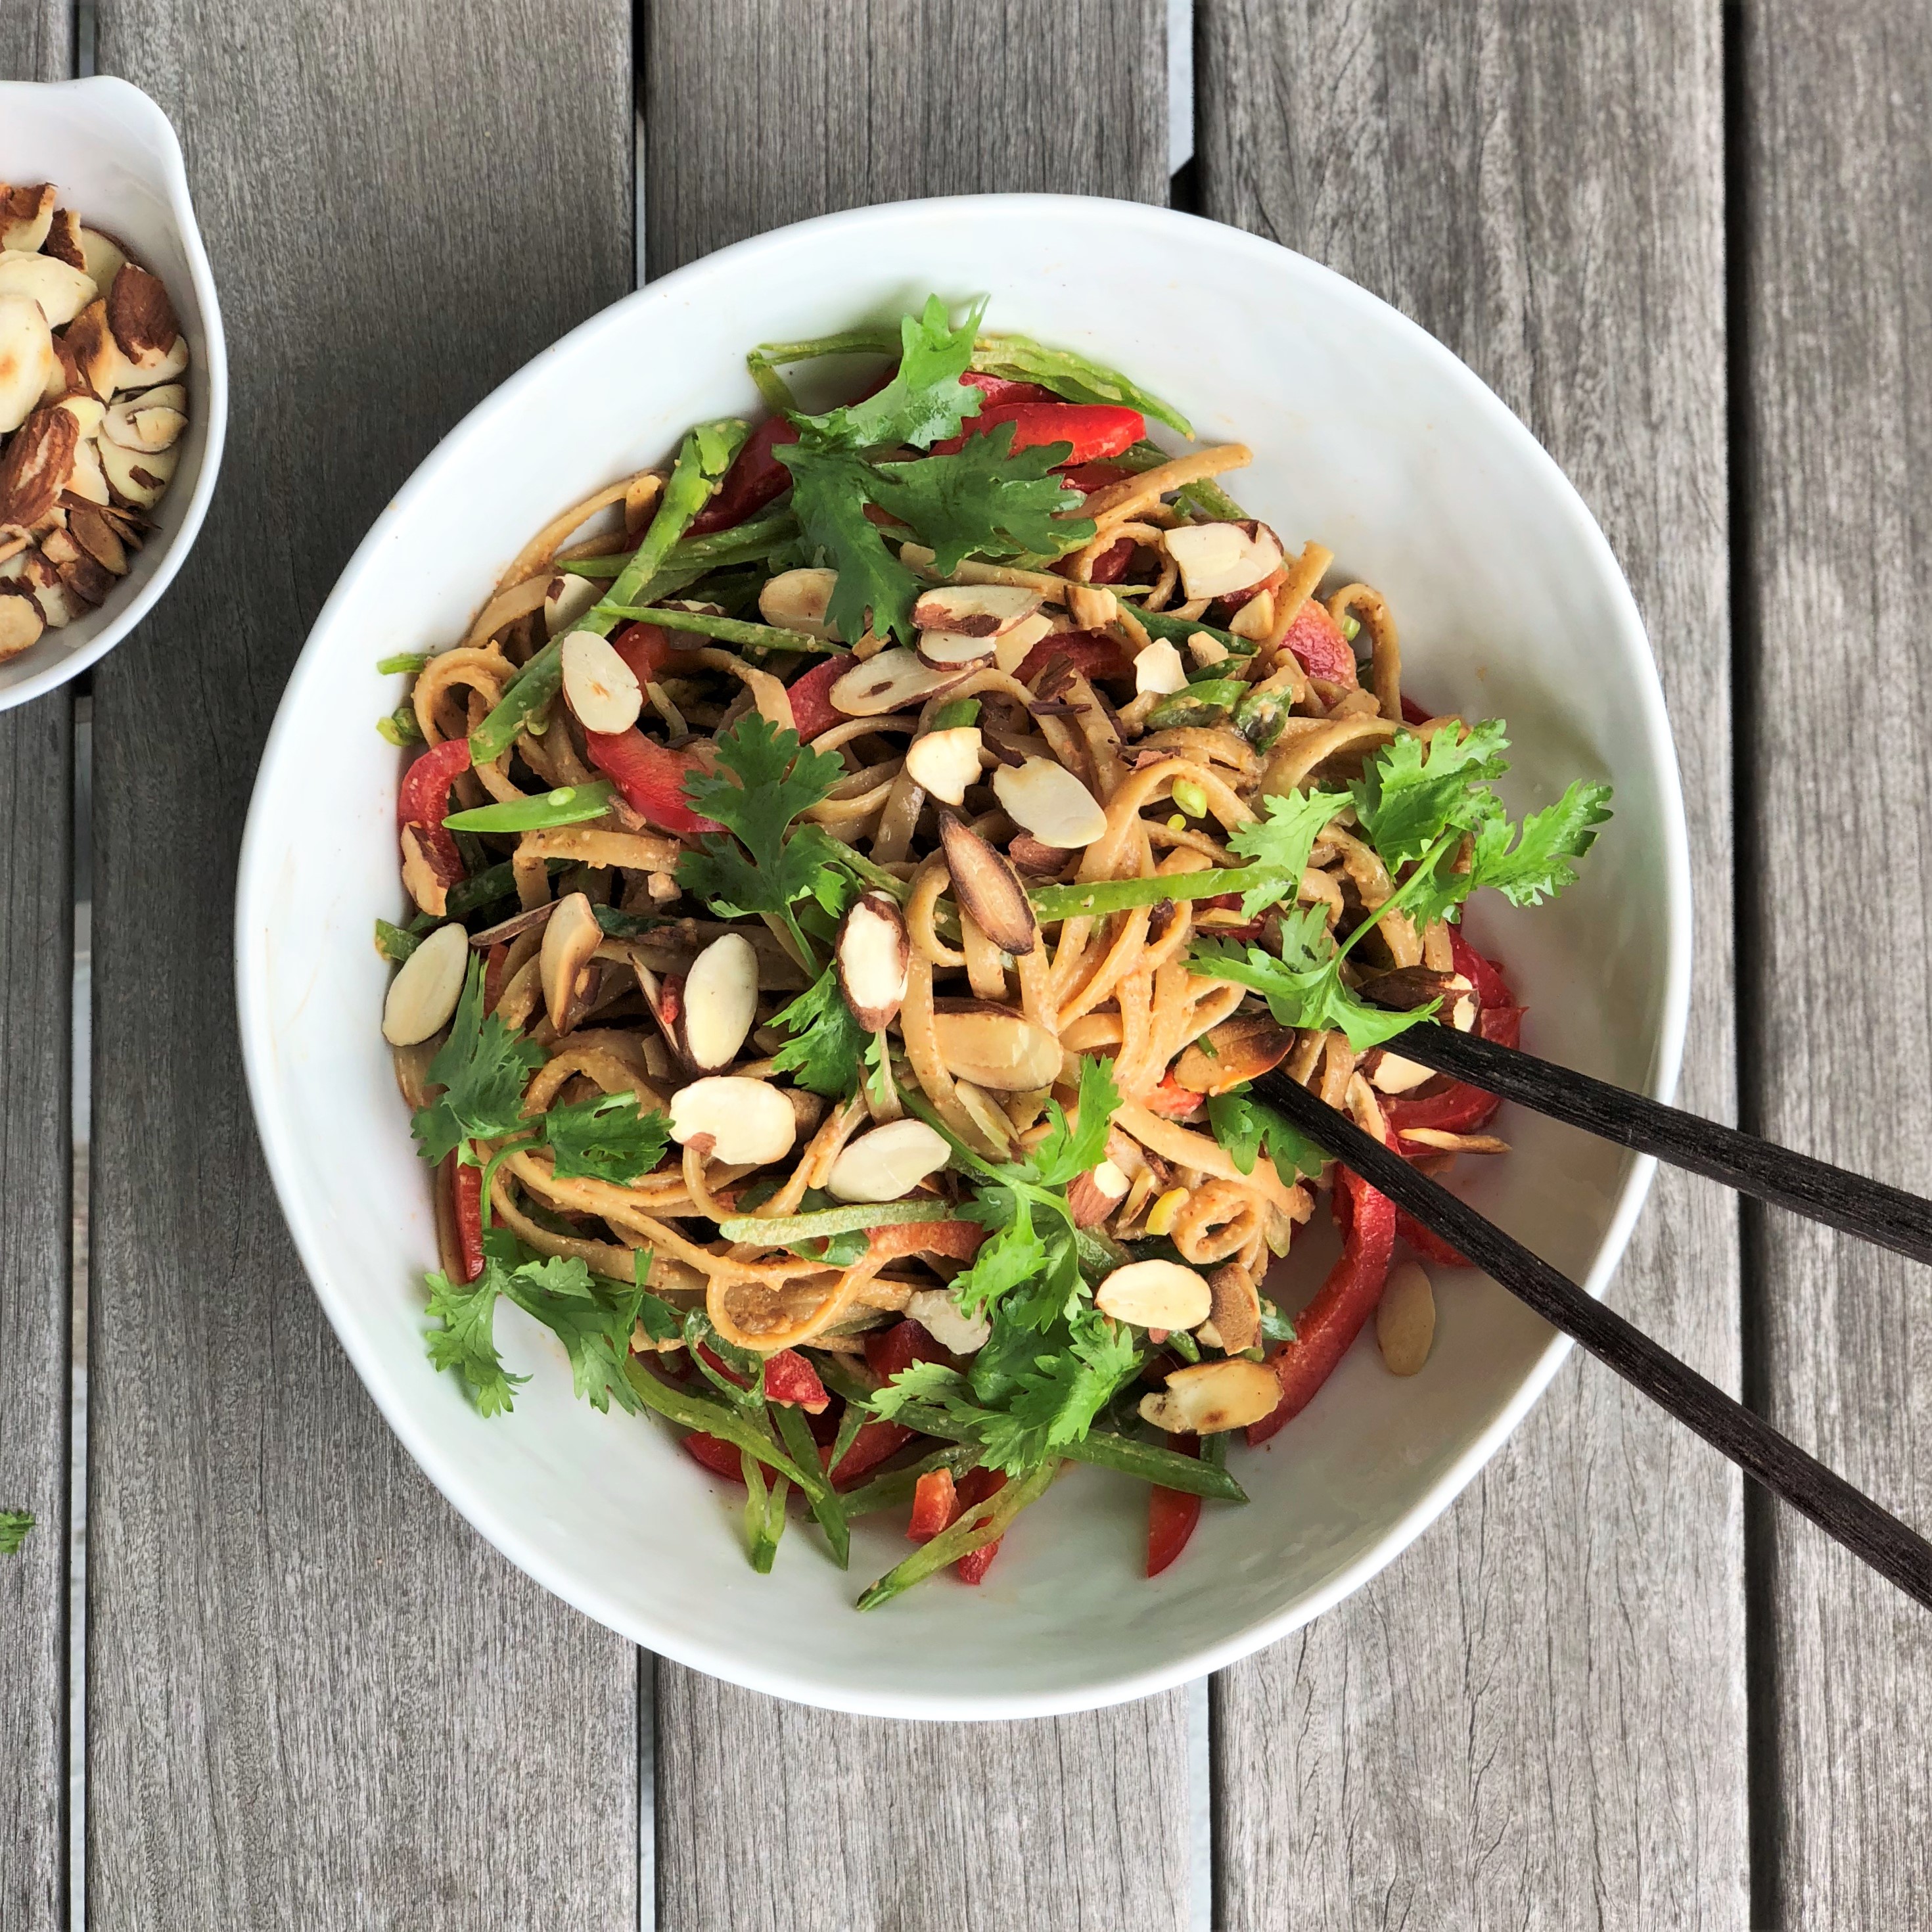 Almond Lover's Asian-Style Noodle Salad